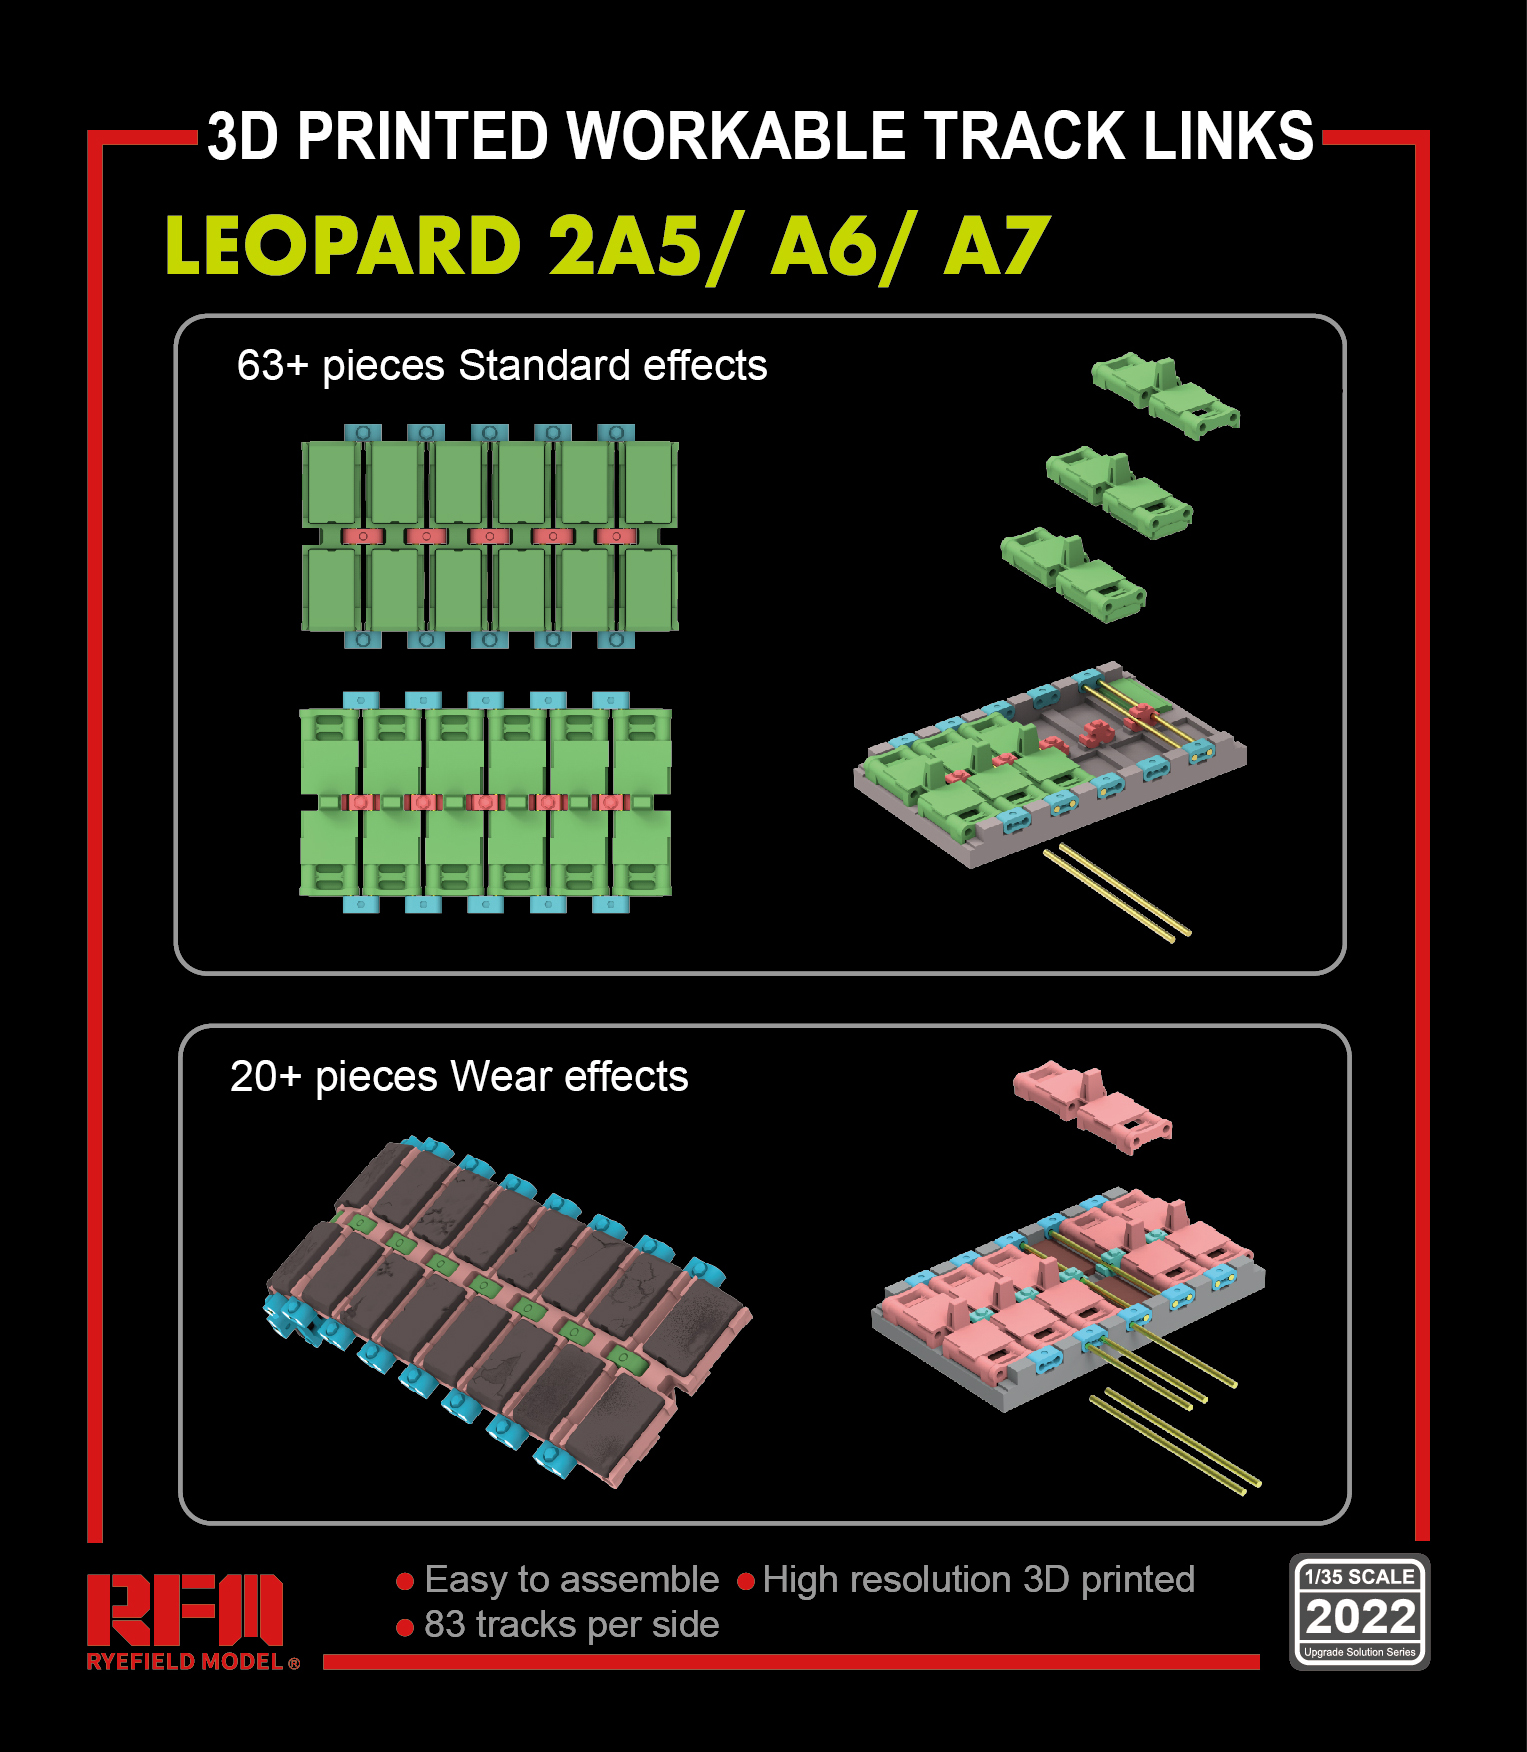 Leopard 2A5/A6/A7 workable tracks (3D printed)